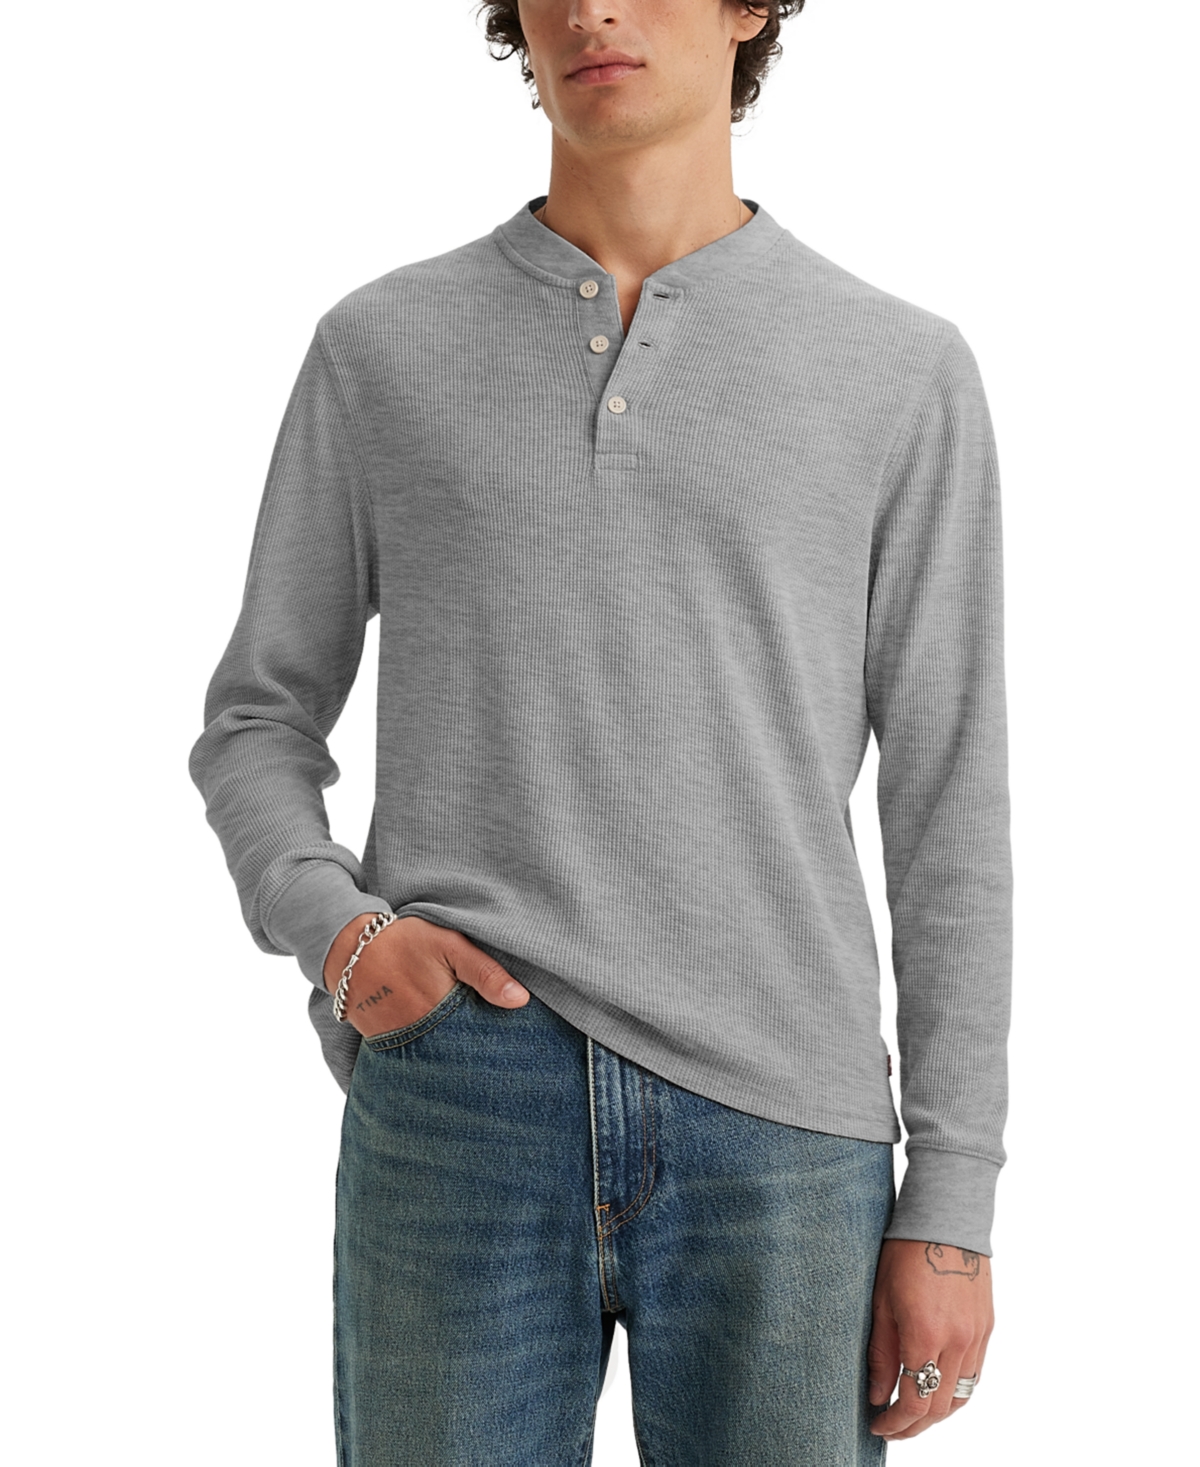 Levi's Levis Men's Long-sleeve Thermal Henley Shirt In Mid Tone Grey Heather